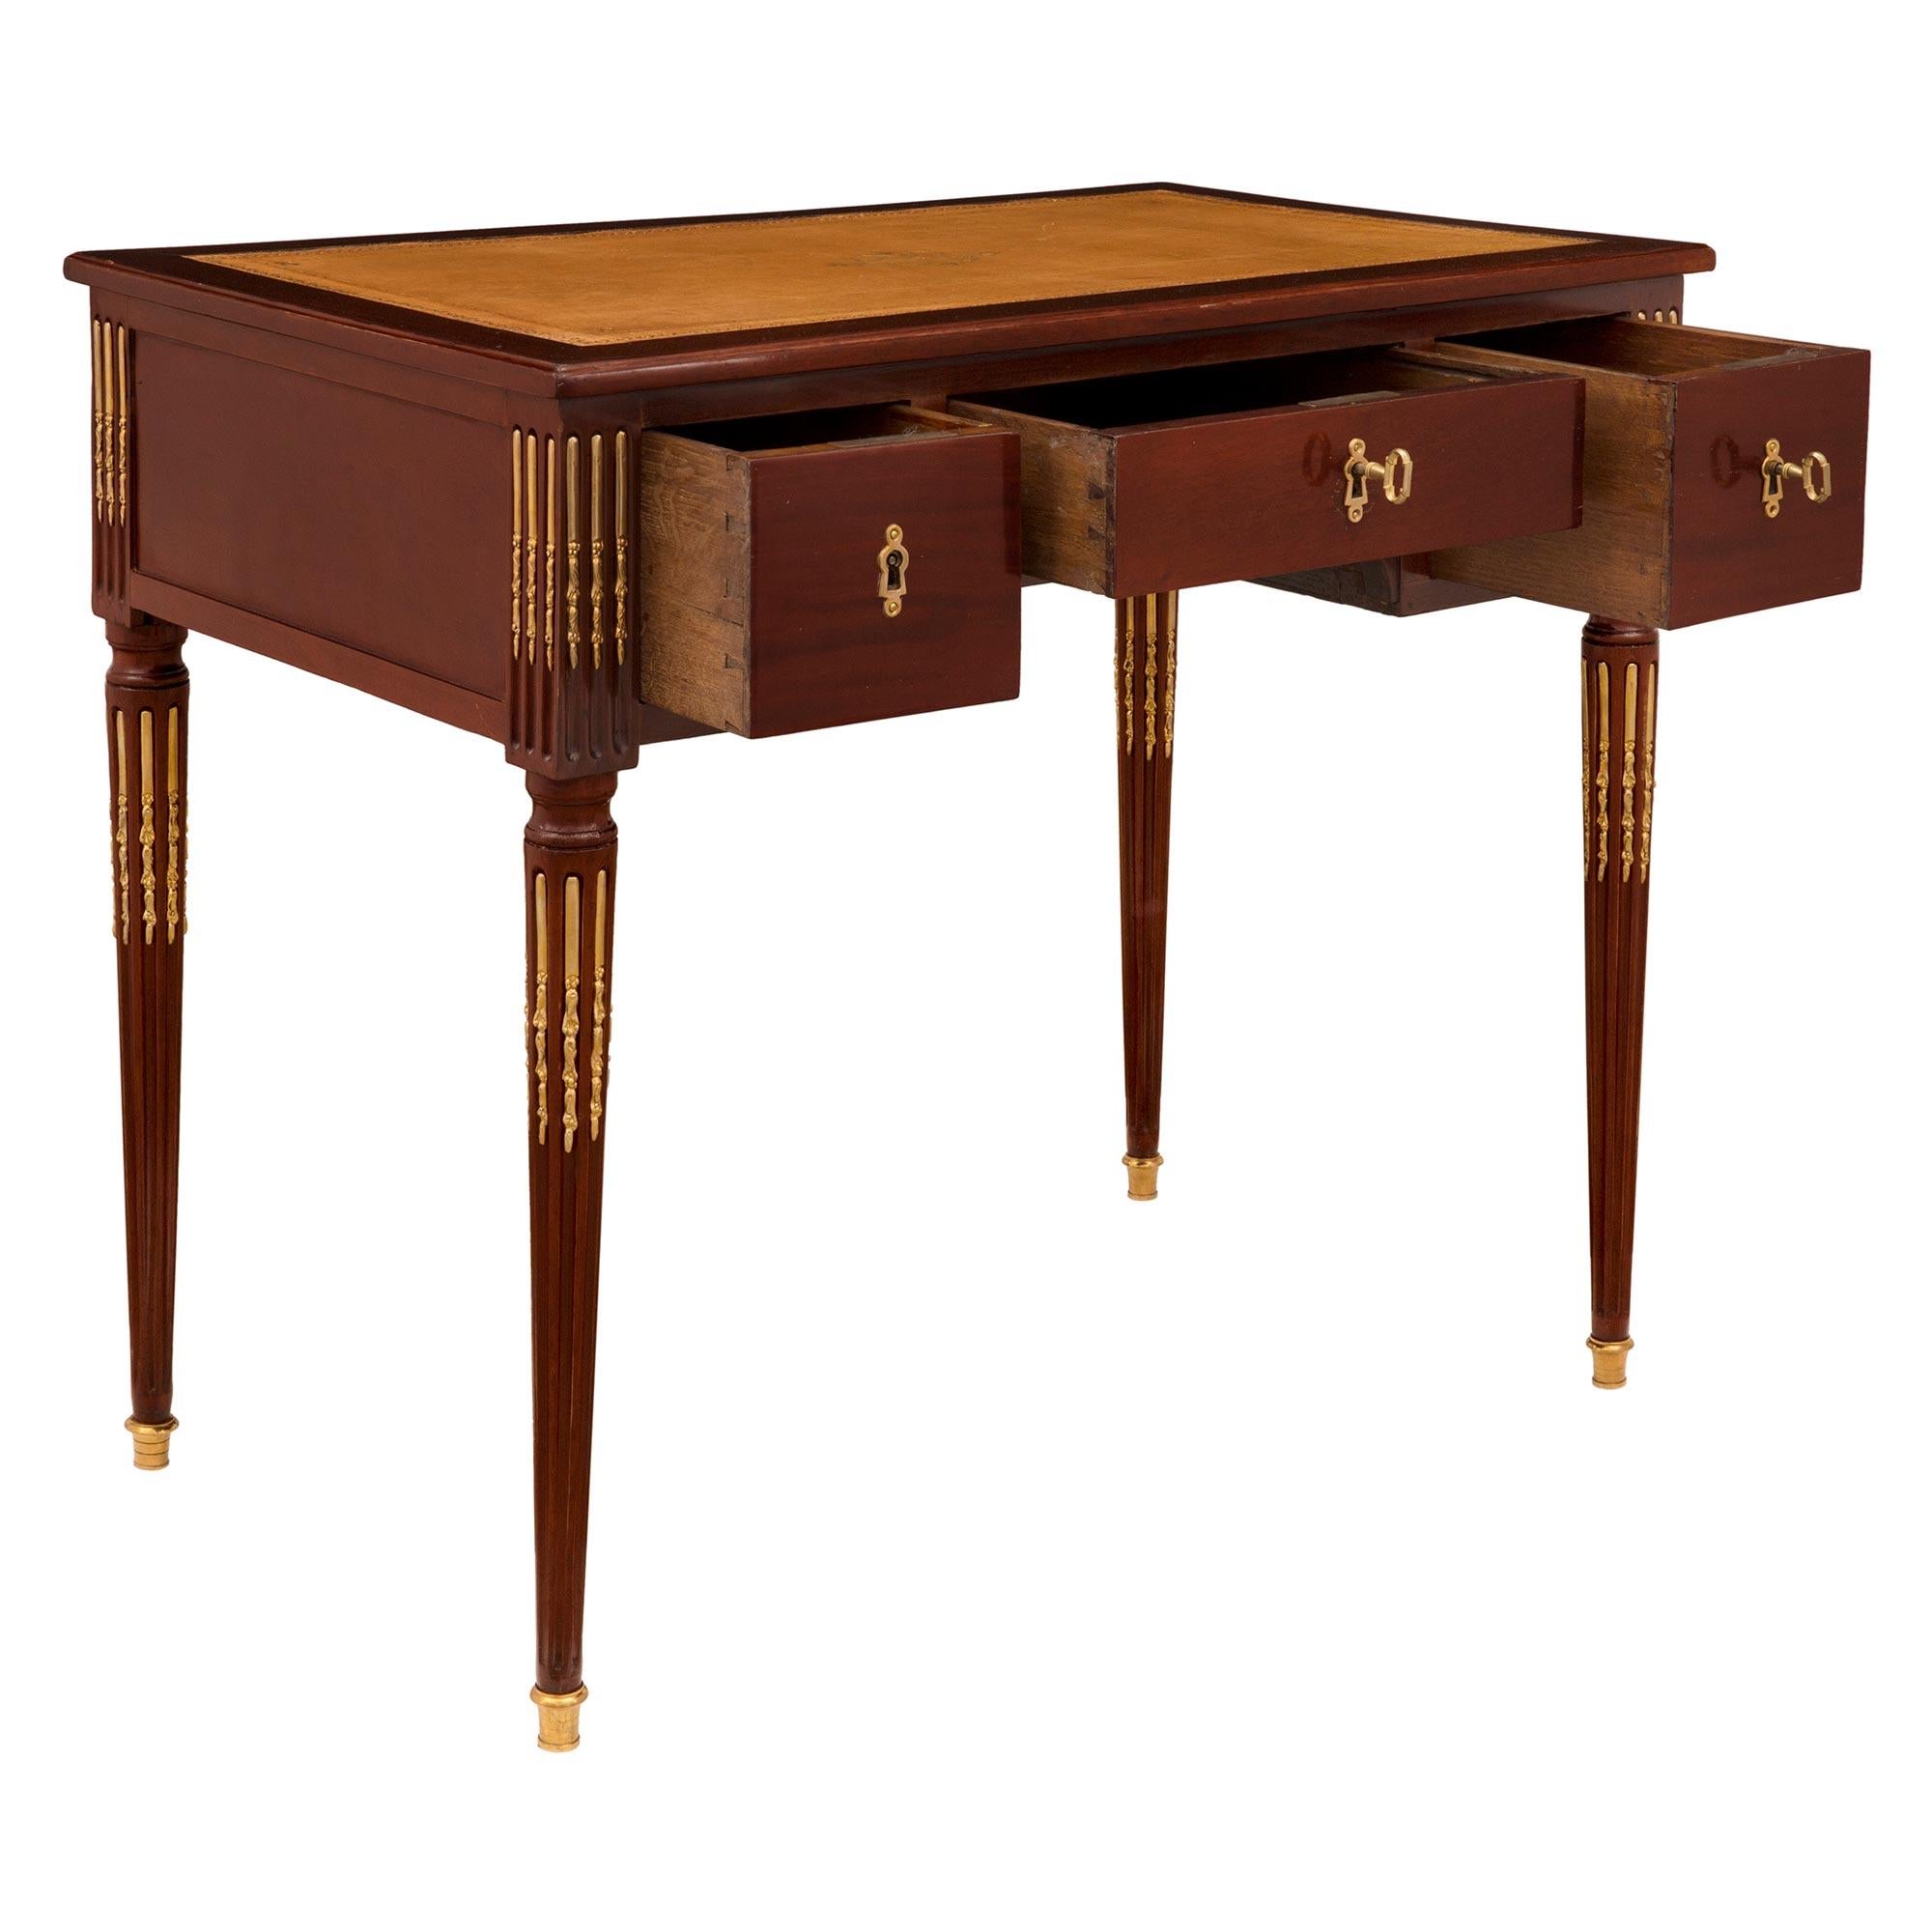 French 18th Century Louis XVI Period Mahogany and Ormolu Desk/Writing Table In Good Condition For Sale In West Palm Beach, FL